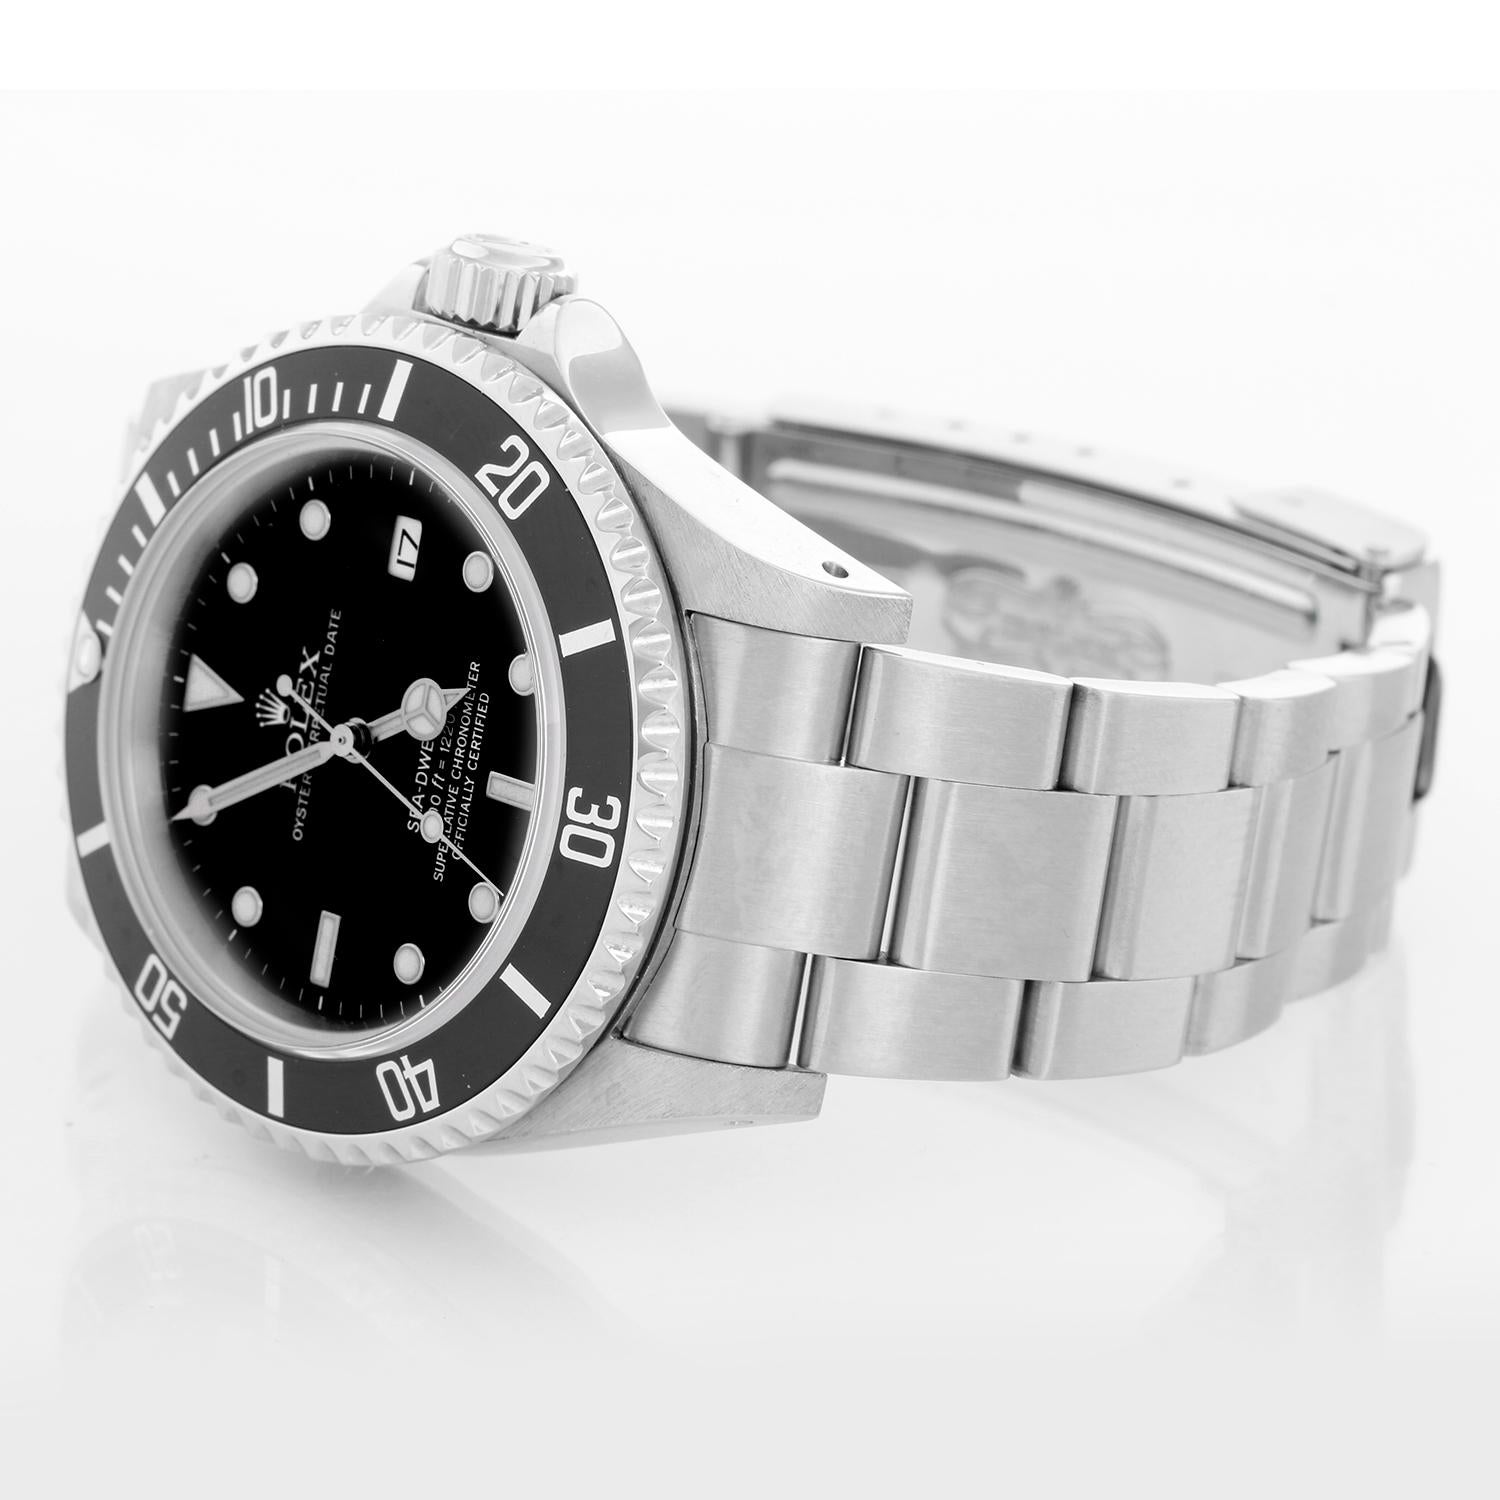 Rolex Sea Dweller Stainless Steel Men's Divers Watch 16600 - Automatic winding, 31 jewels, Quickset, sapphire crystal. Stainless steel case with rotating bezel and helium escape valve (40mm diameter). Black dial with luminous markers. Stainless